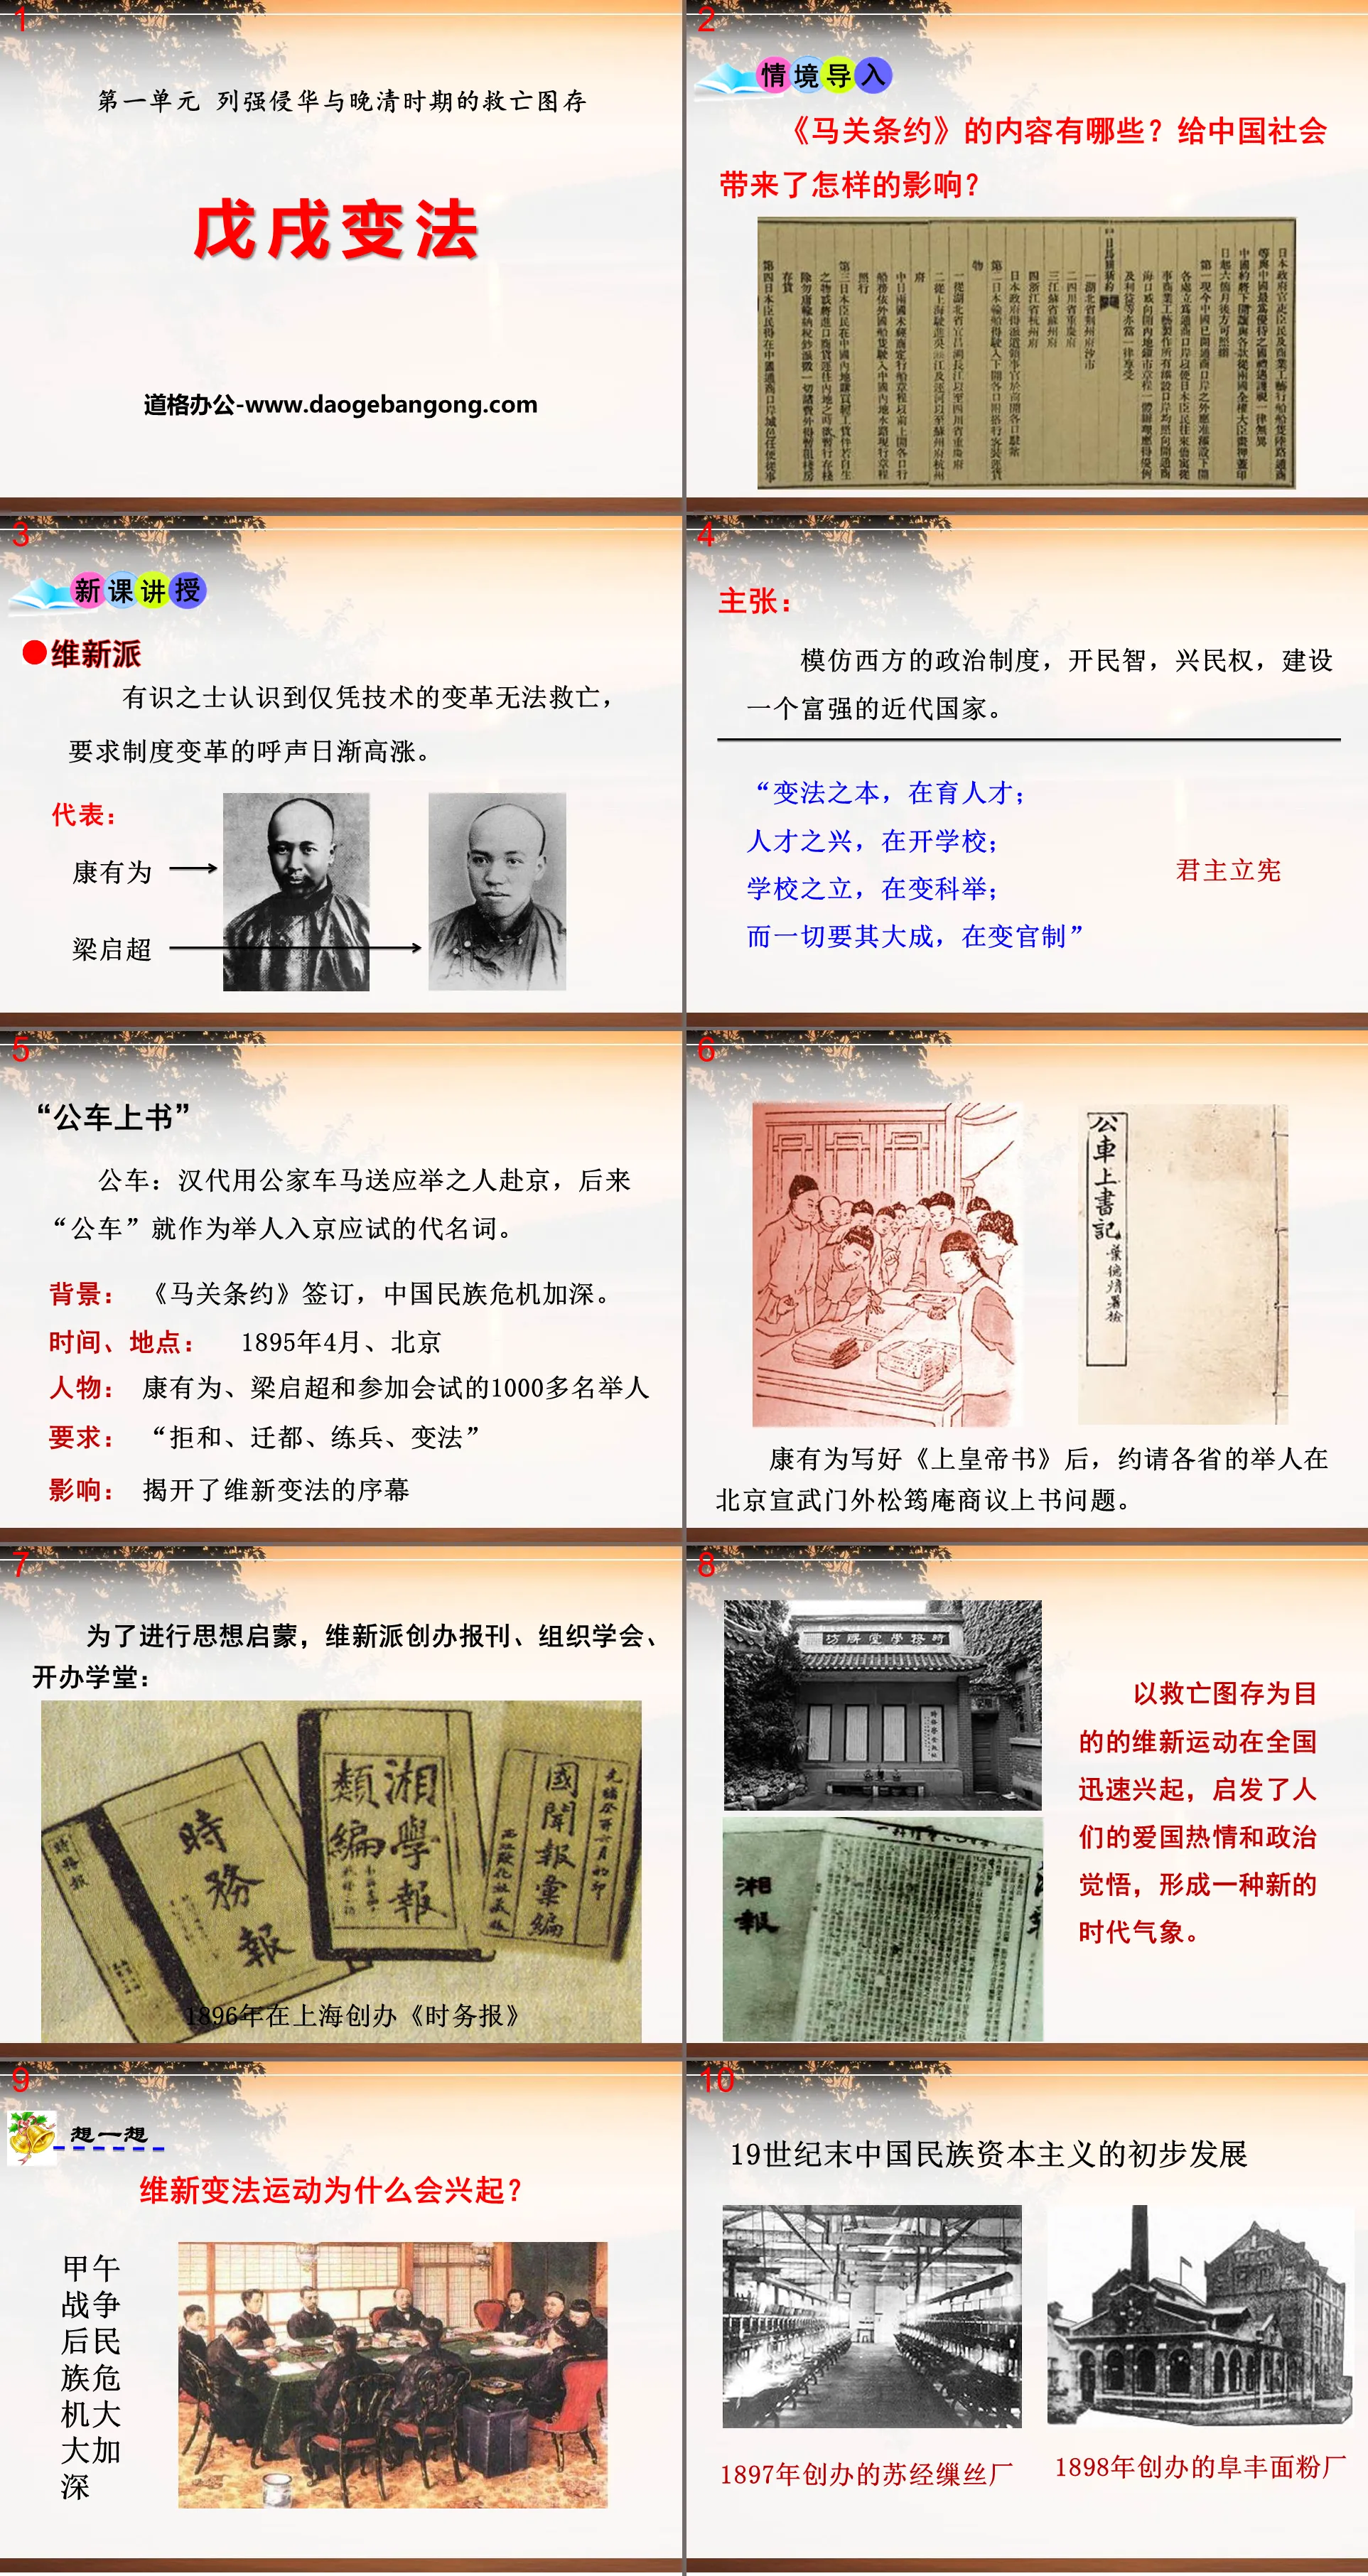 "The Reform Movement of 1898", the invasion of China by foreign powers and the salvation plan during the late Qing Dynasty PPT courseware